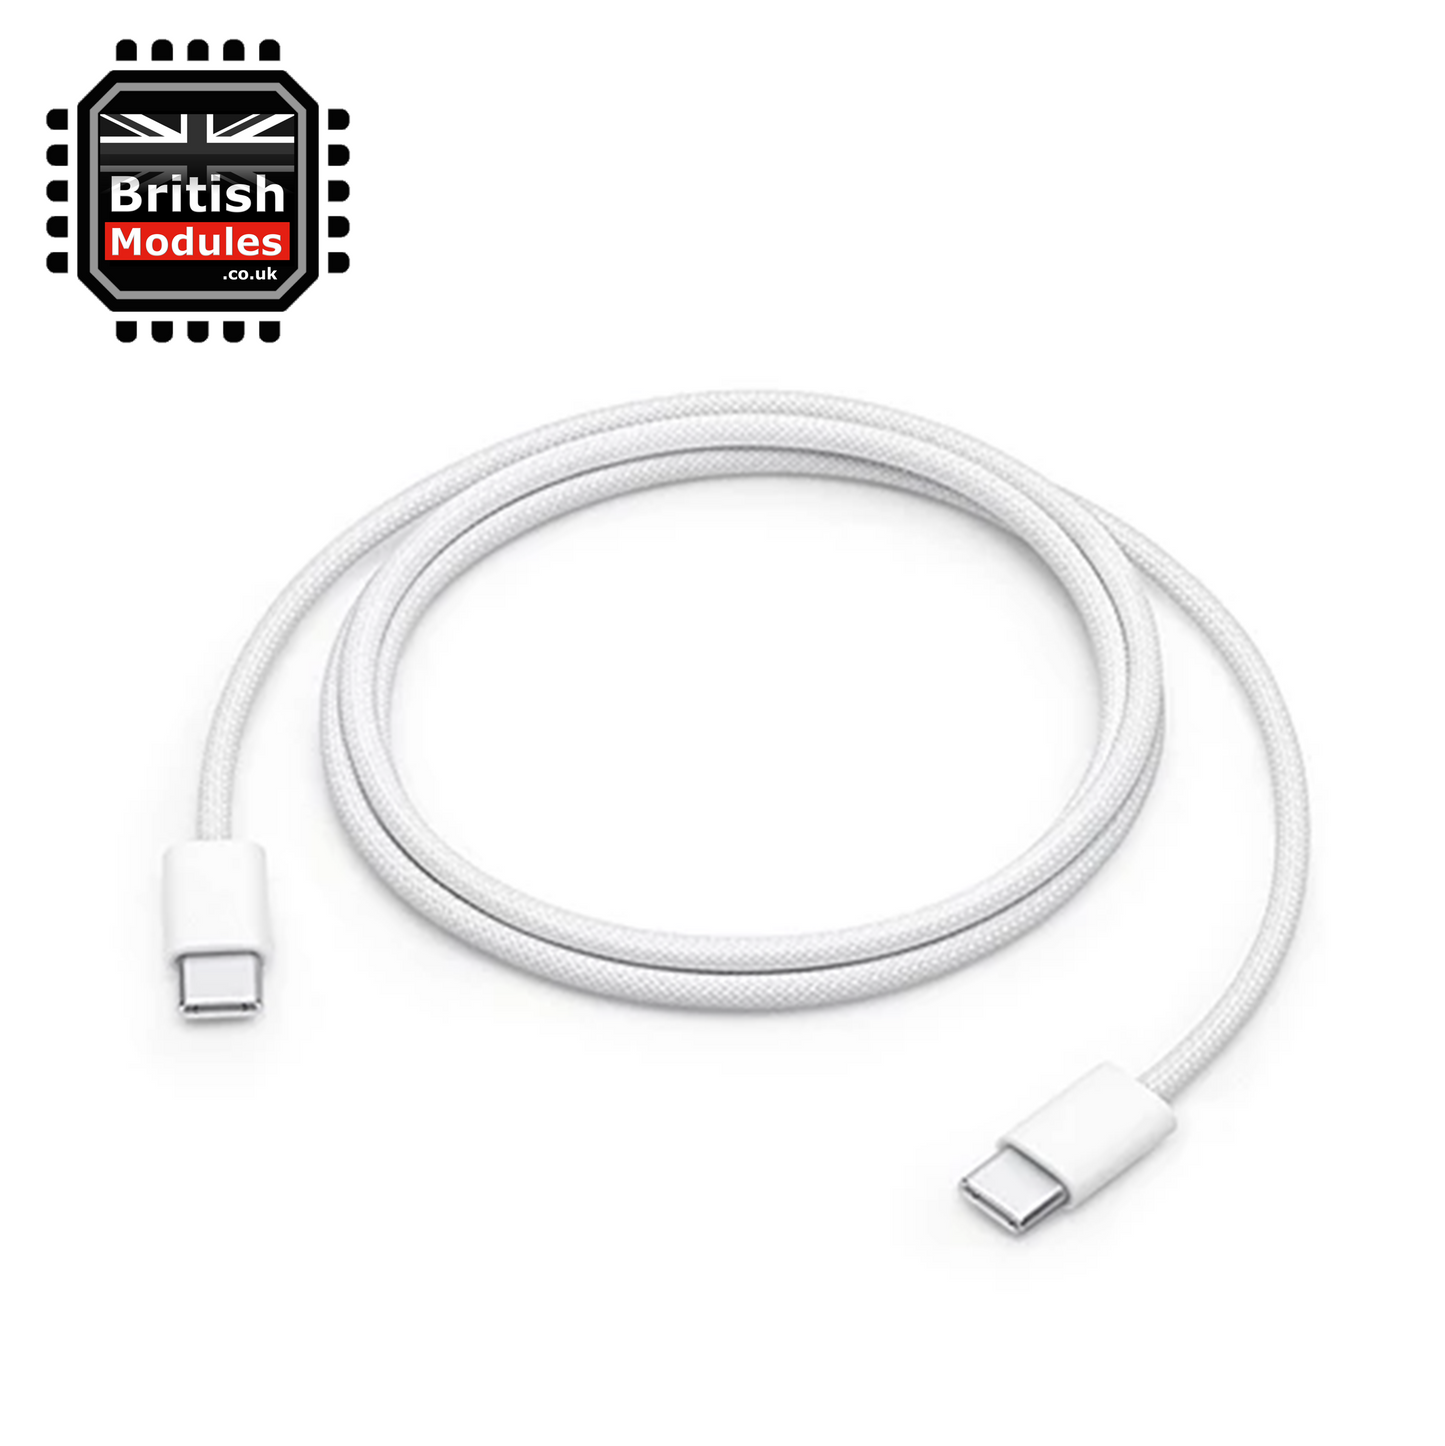 USB C to USB C Charge Cable (1m) Sync Cable for Apple iPhone Woven Design